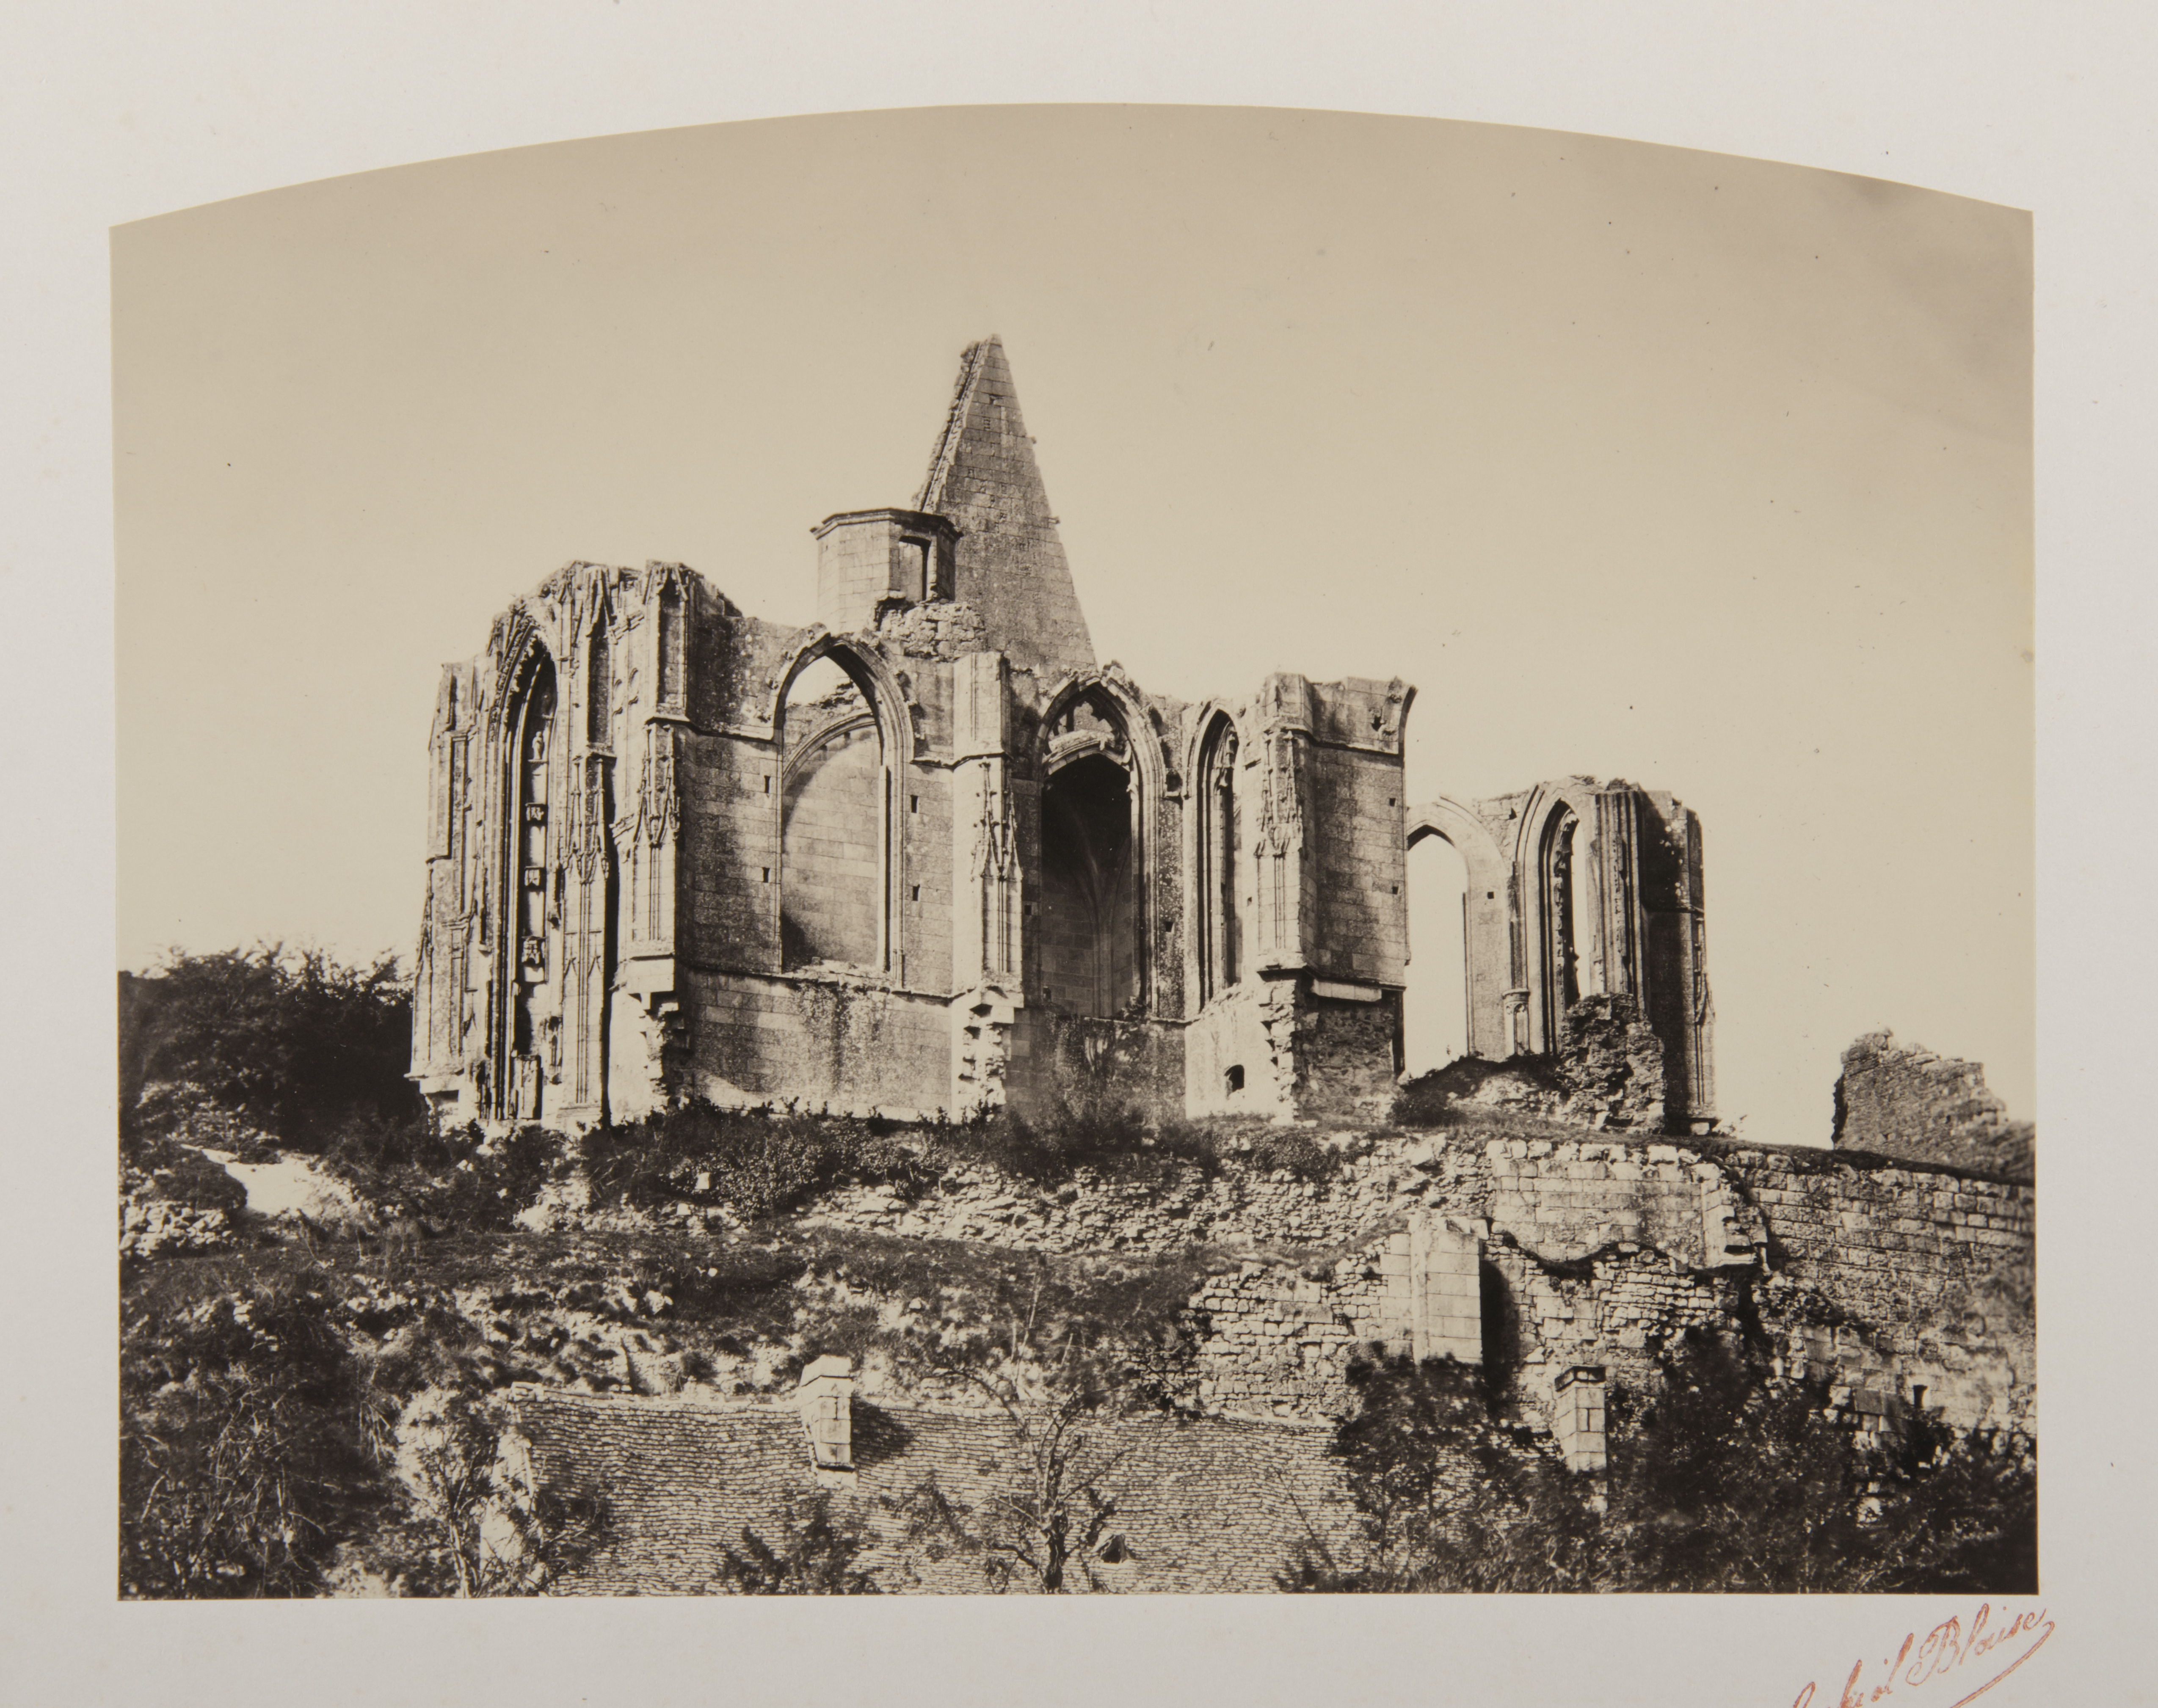 Untitled [view of ruined cathedral]